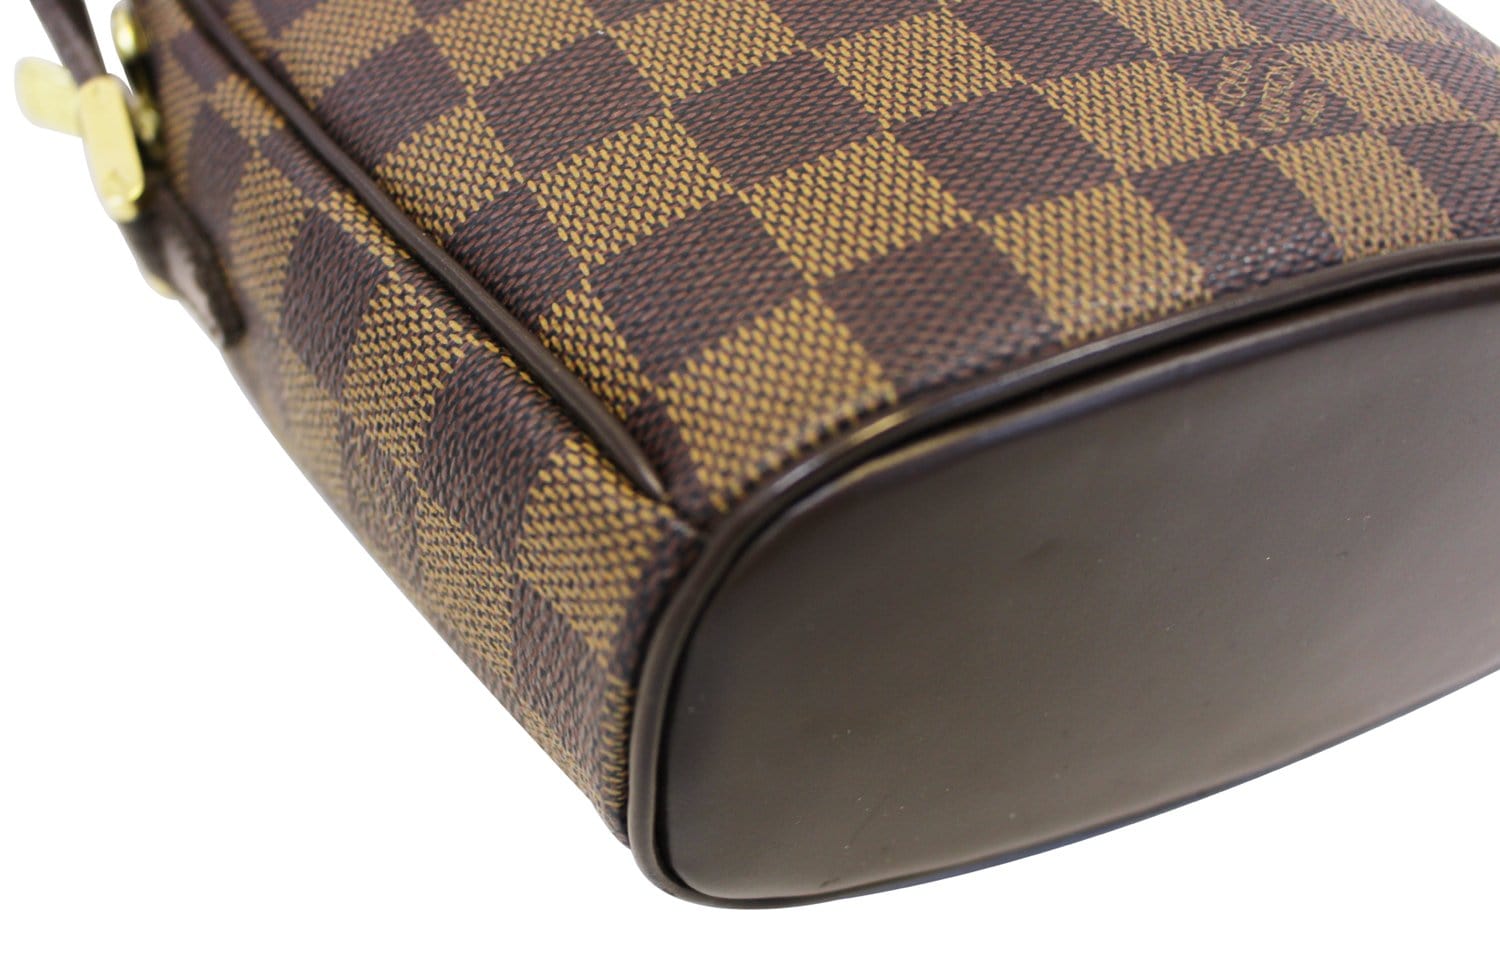 7 things that fits and Visual review of Louis Vuitton Ipanema PM Damier  Ebene 